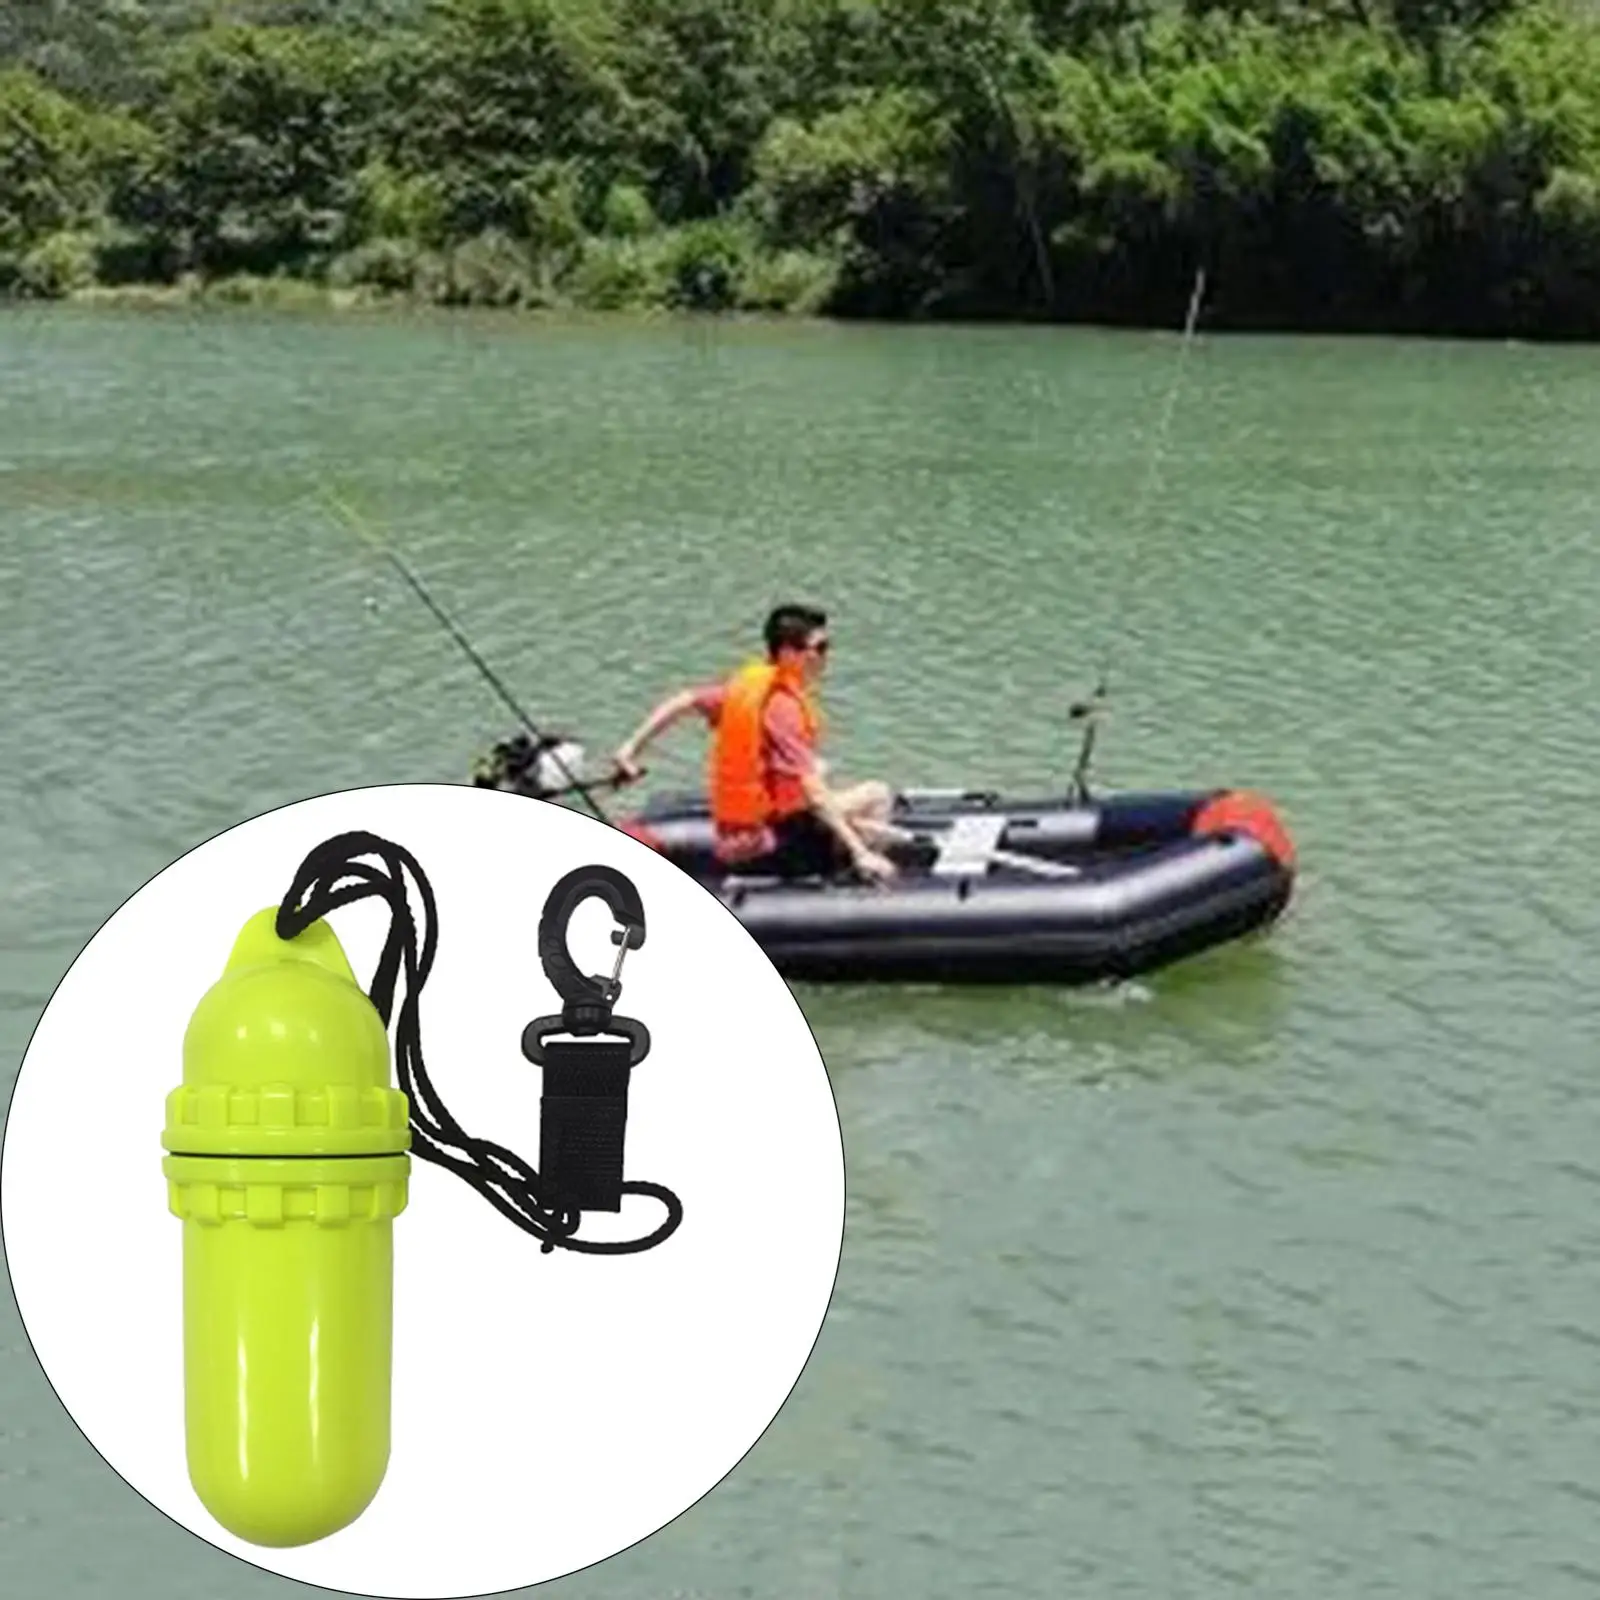 Waterproof Dry Bag Portable with Rope and Clip for Kayaking, Beach, Rafting, Boating, Hiking, Camping and Fishing